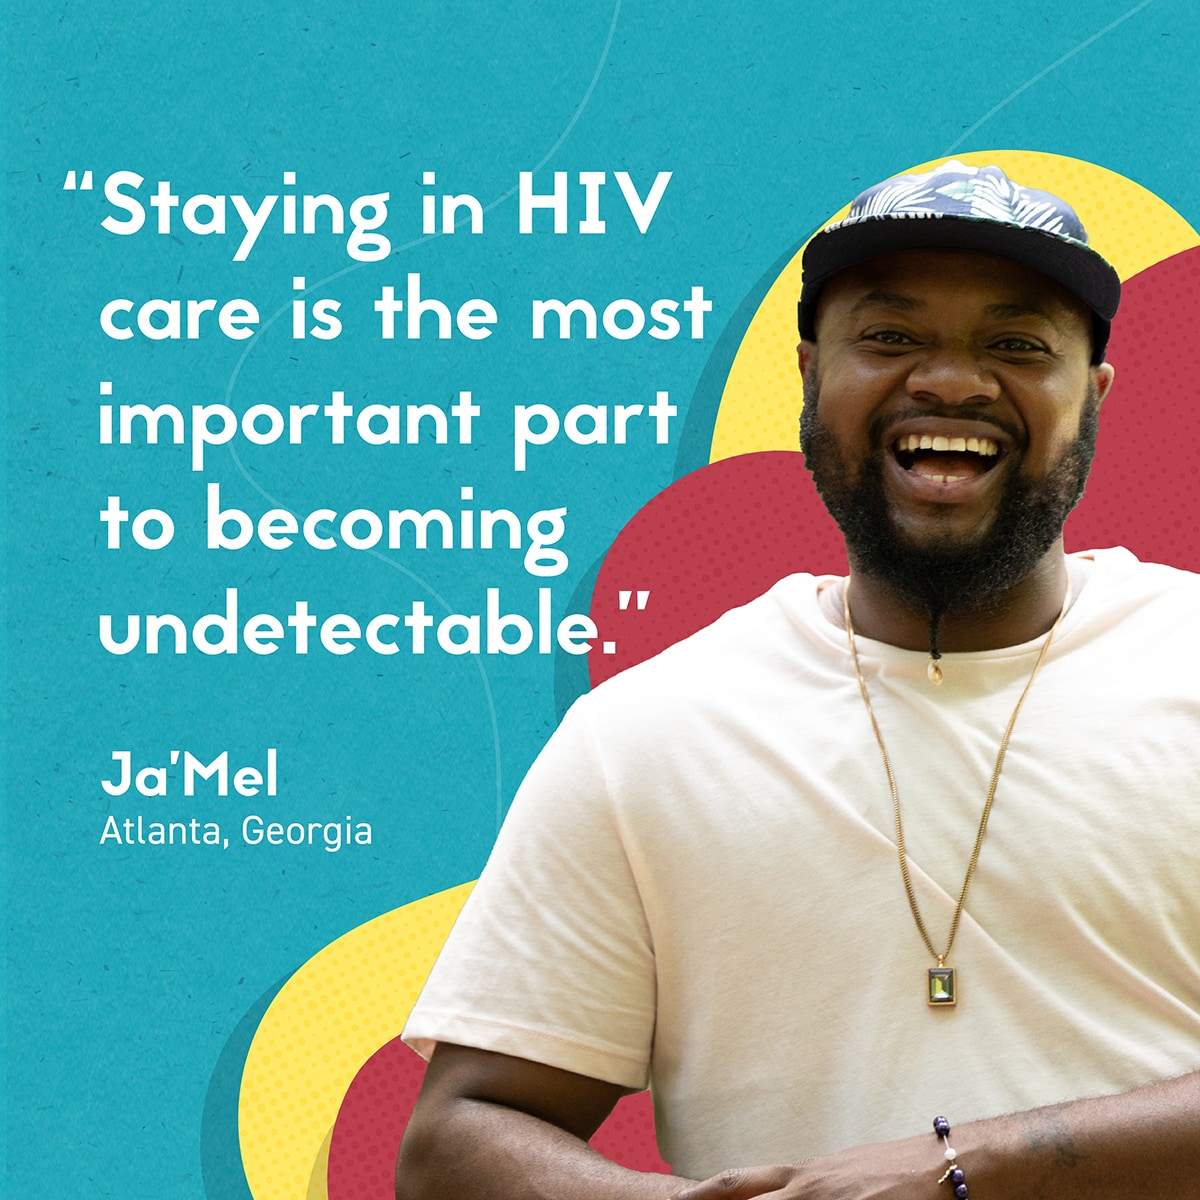 Staying in HIV care is the most important part to becoming undetectable.